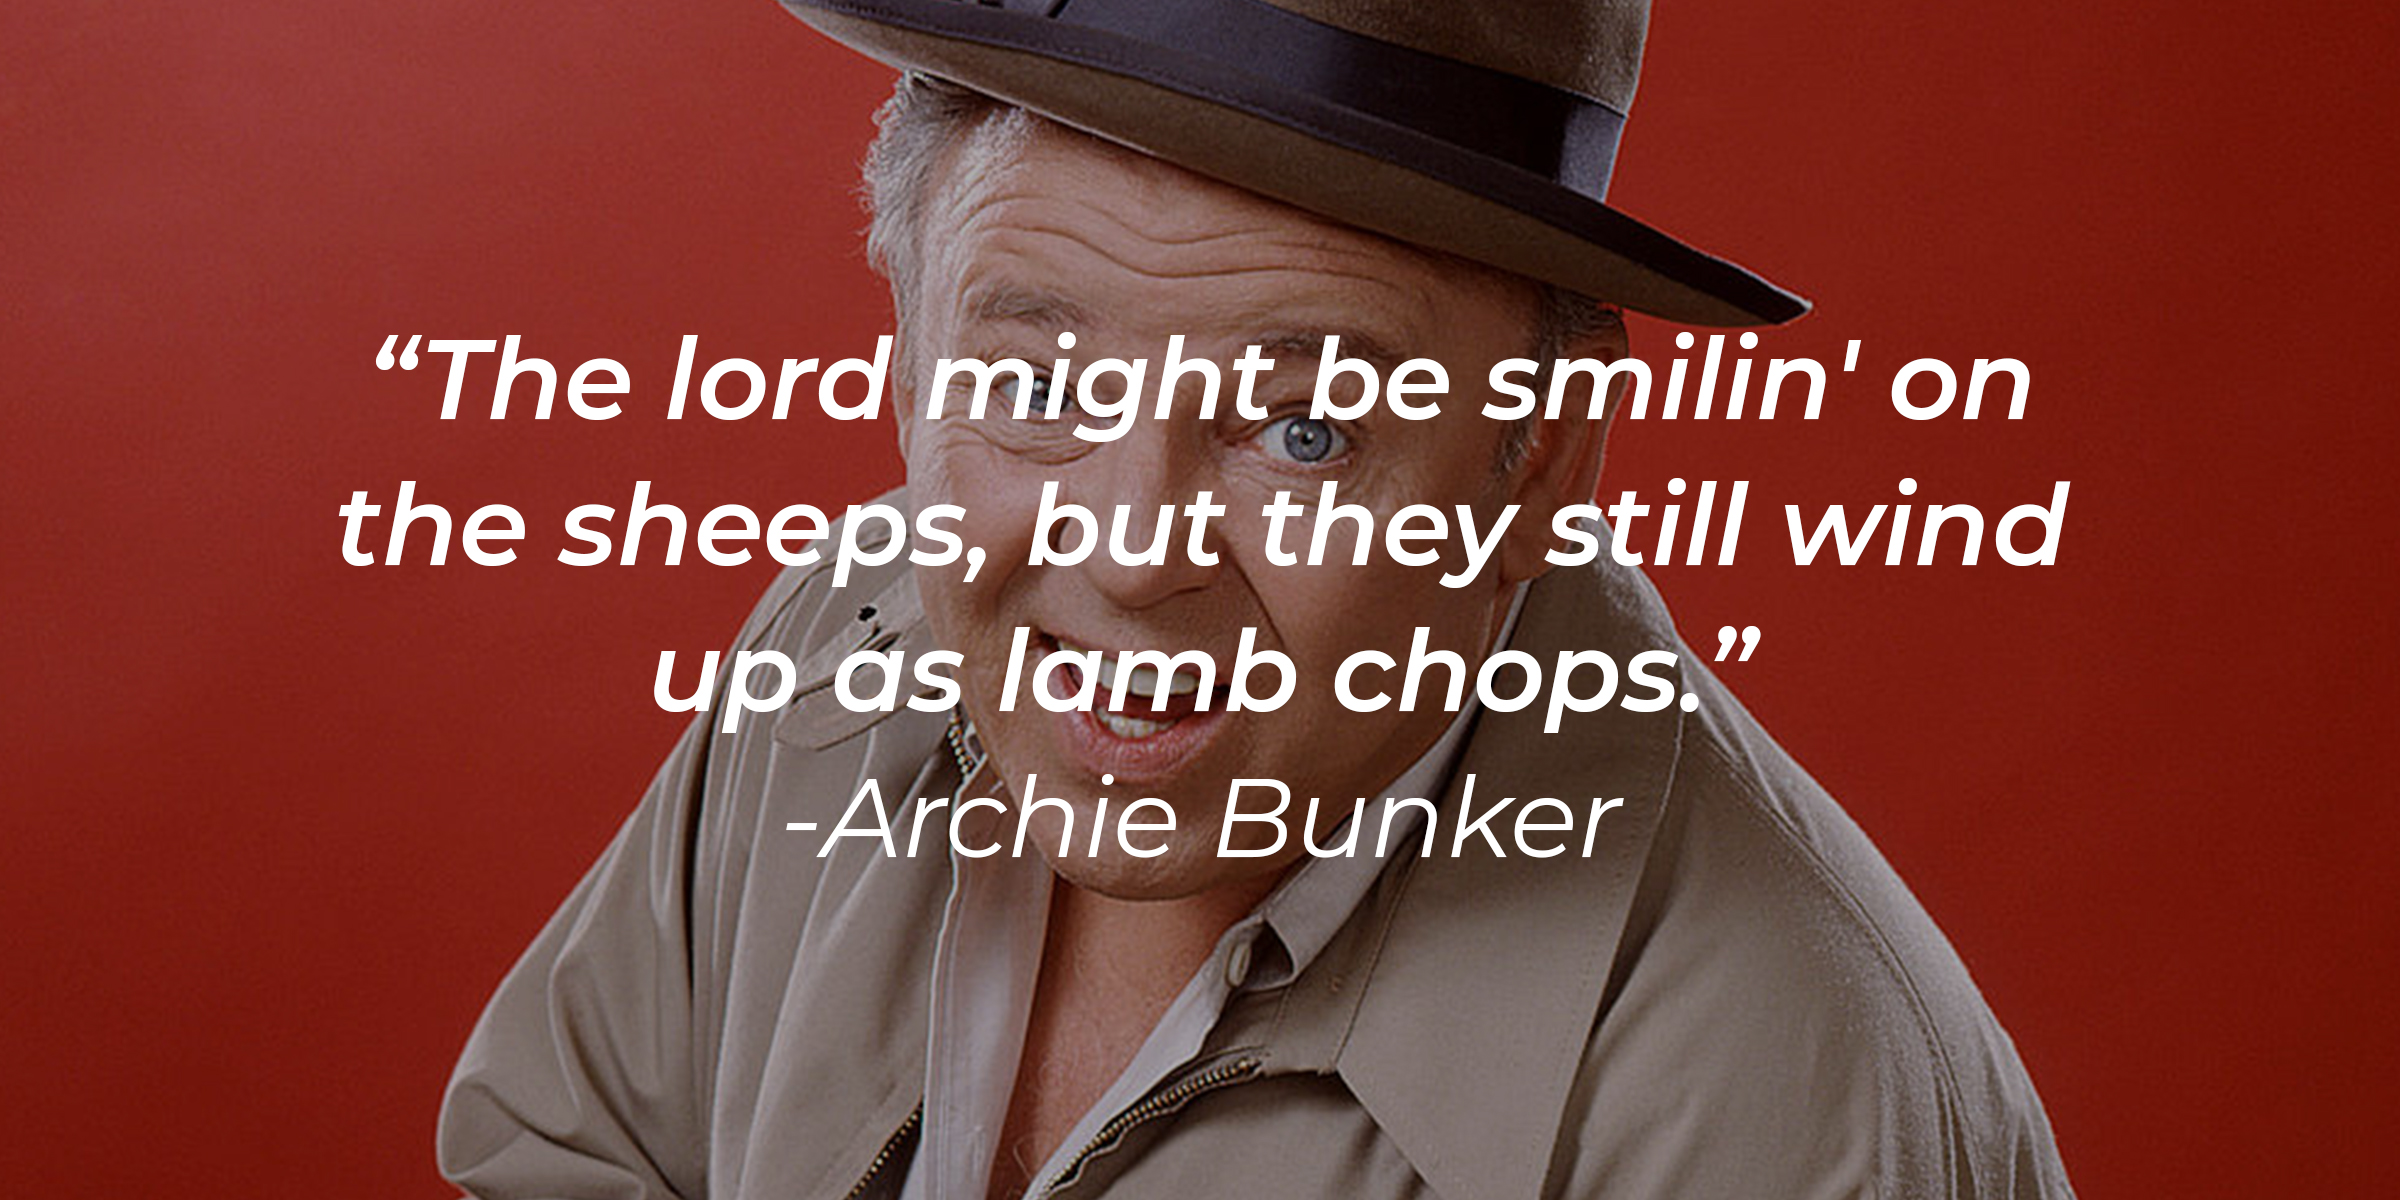 An Image of Archie Bunker with the quote, "The lord might be smilin' on the sheeps, but they still wind up as lamb chops." | Source: Getty Images